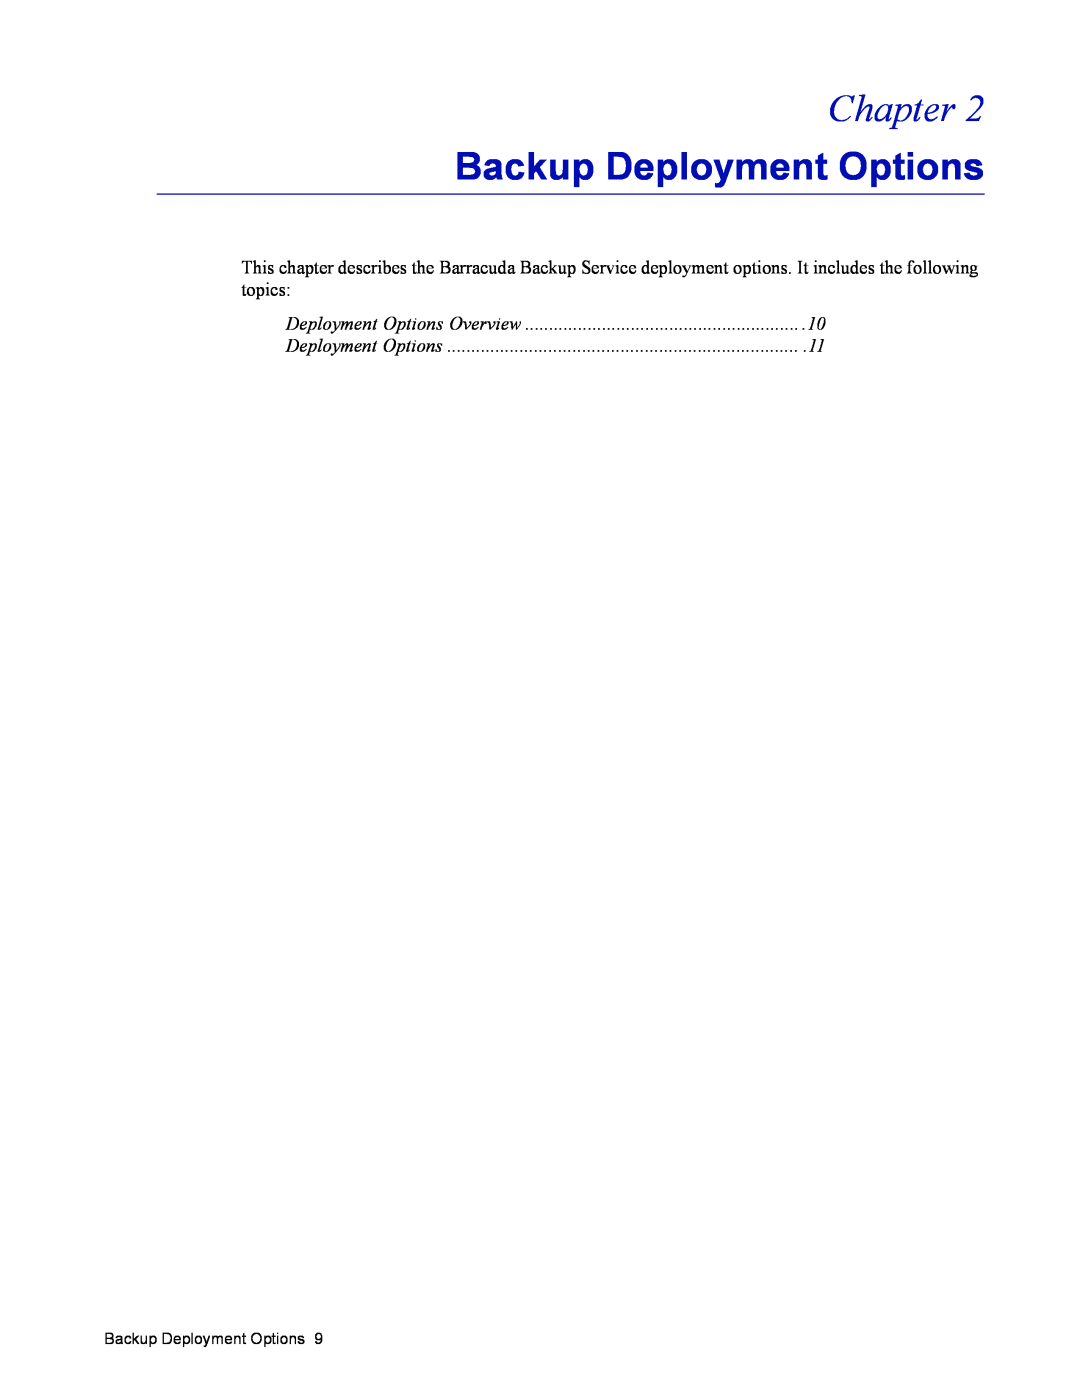 Barracuda Networks 4 manual Backup Deployment Options, Chapter, Deployment Options Overview 